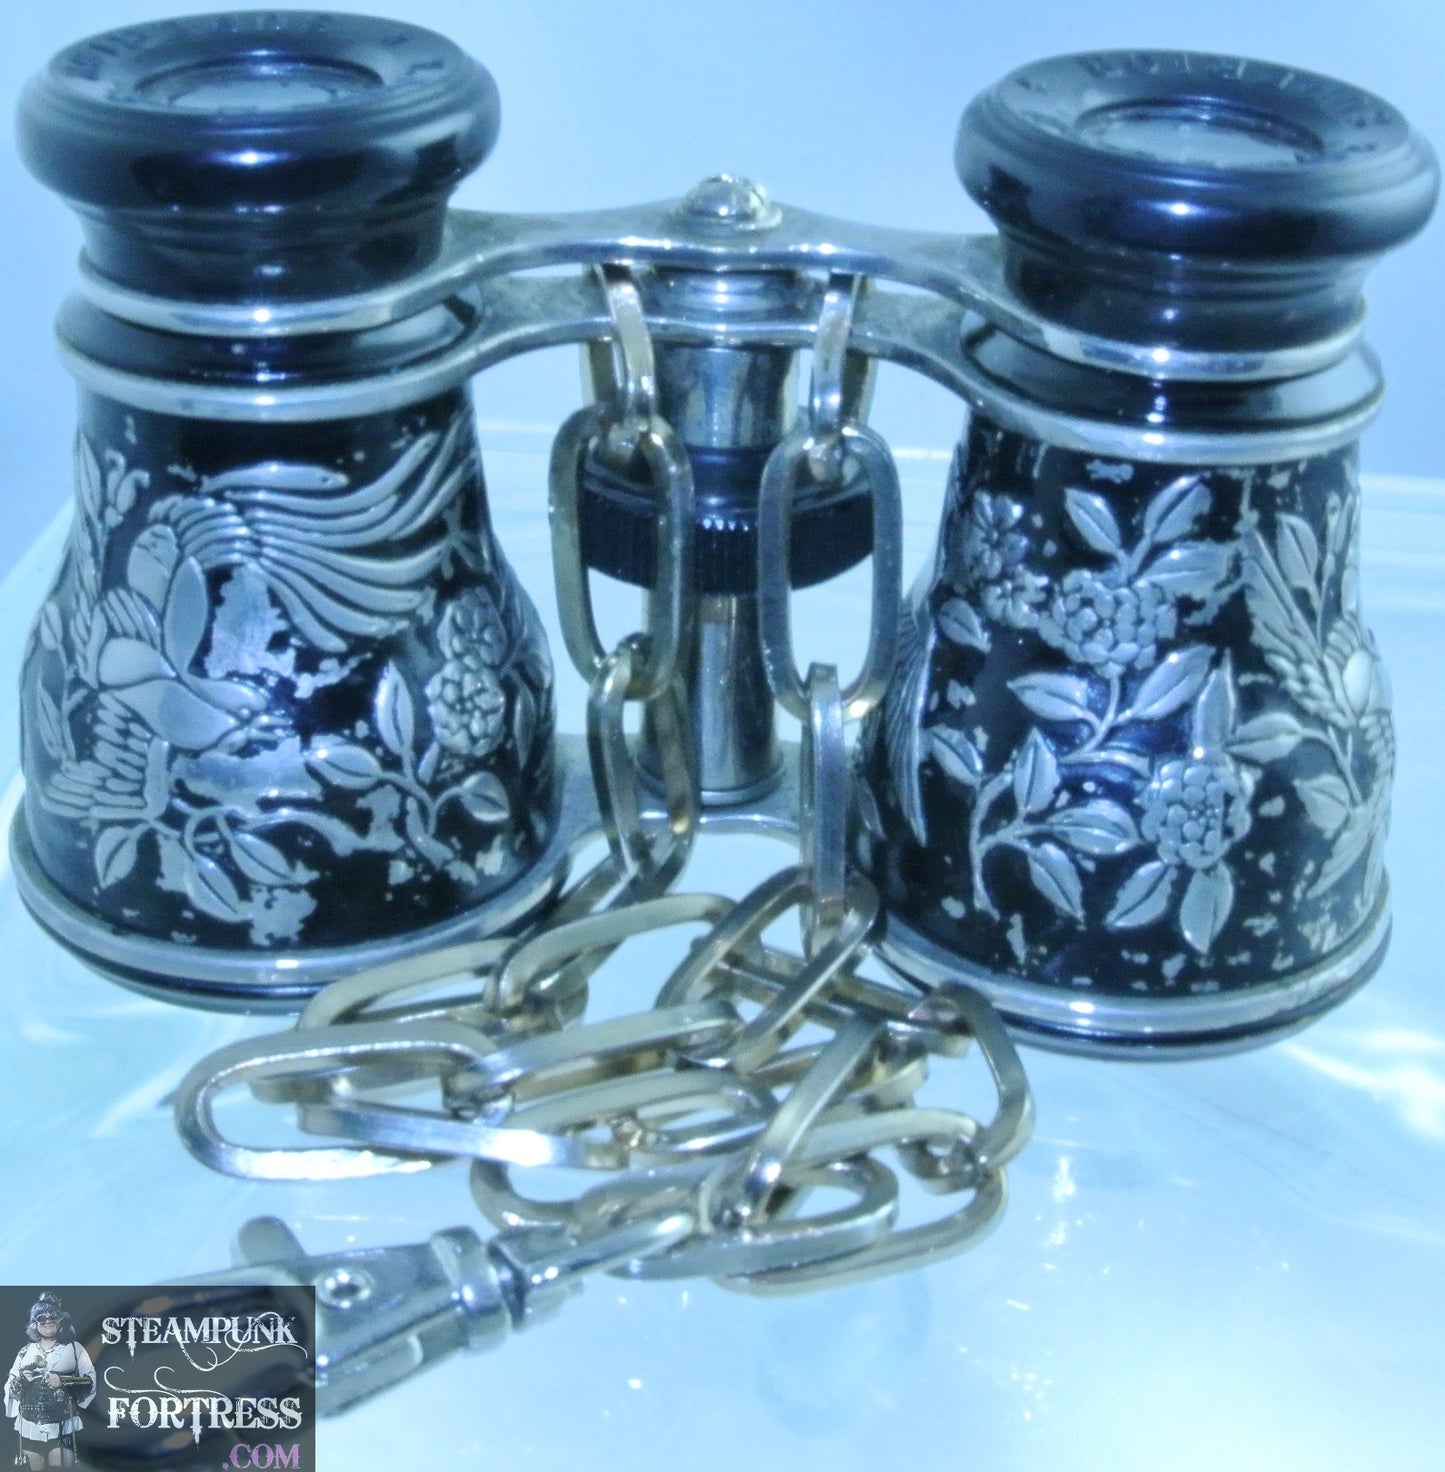 VINTAGE BLACK SILVER ETCHED BIRDS FLOWERS BINOCULARS OPERA GLASSES SILVER OVAL CHAIN CLASP STARR WILDE STEAMPUNK FORTRESS